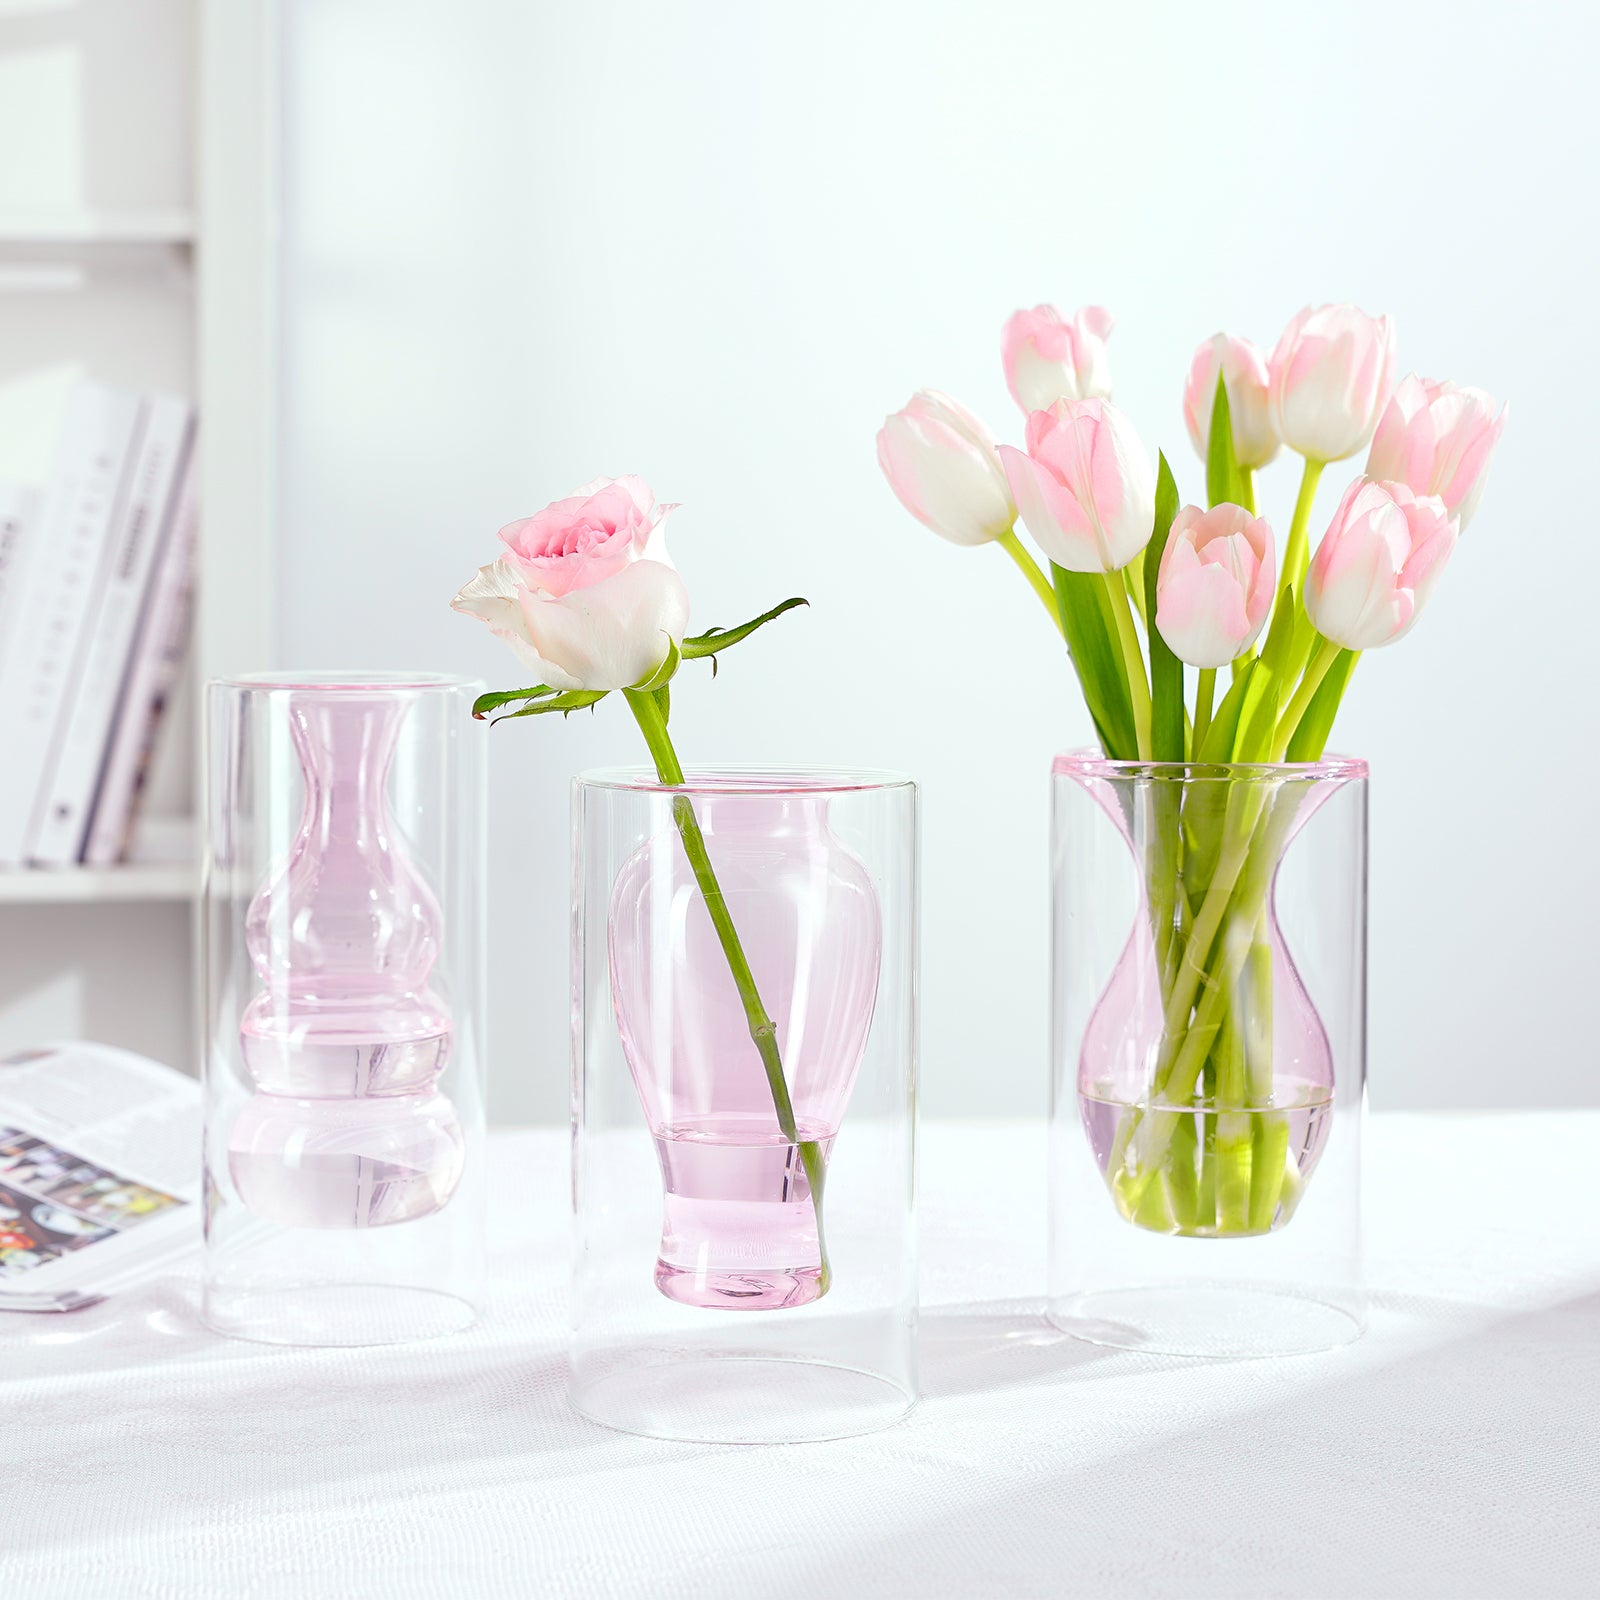 ZENS Pink Glass Flower Vase, Modern Hand Blown Hollowed Floating Glass Vase for Home Décor or Wedding Centerpieces